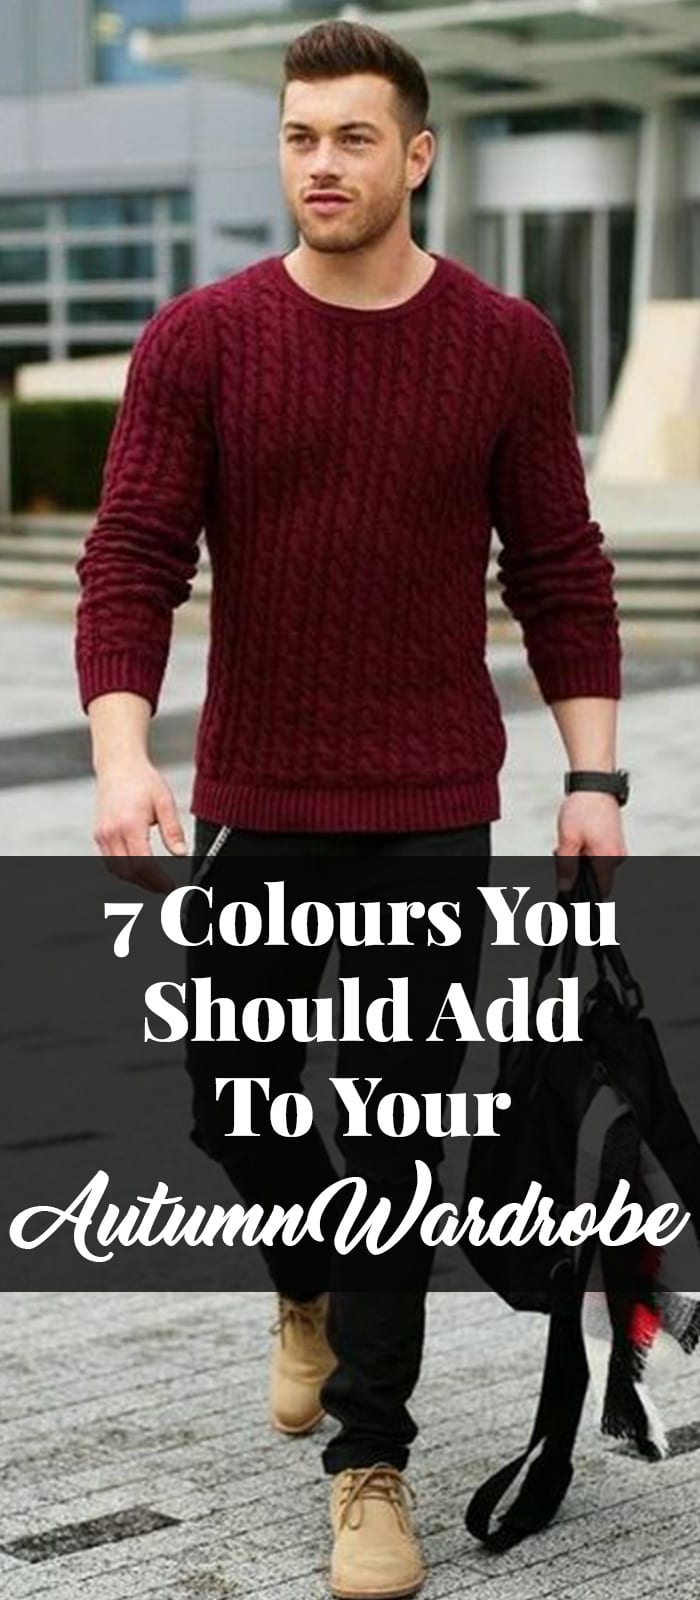 7 Colours You Should Add To Your Autumn Wardrobe